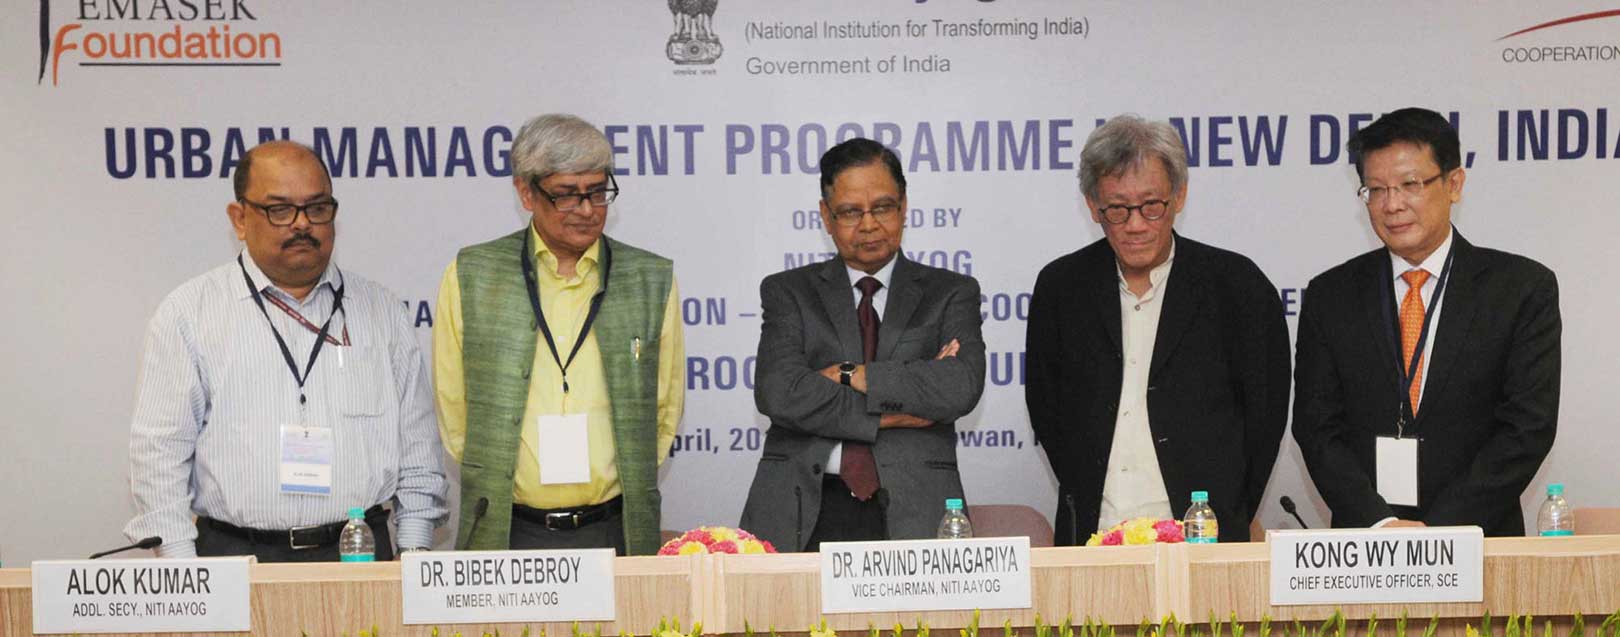 NITI Aayog-SCE launches urban management programme